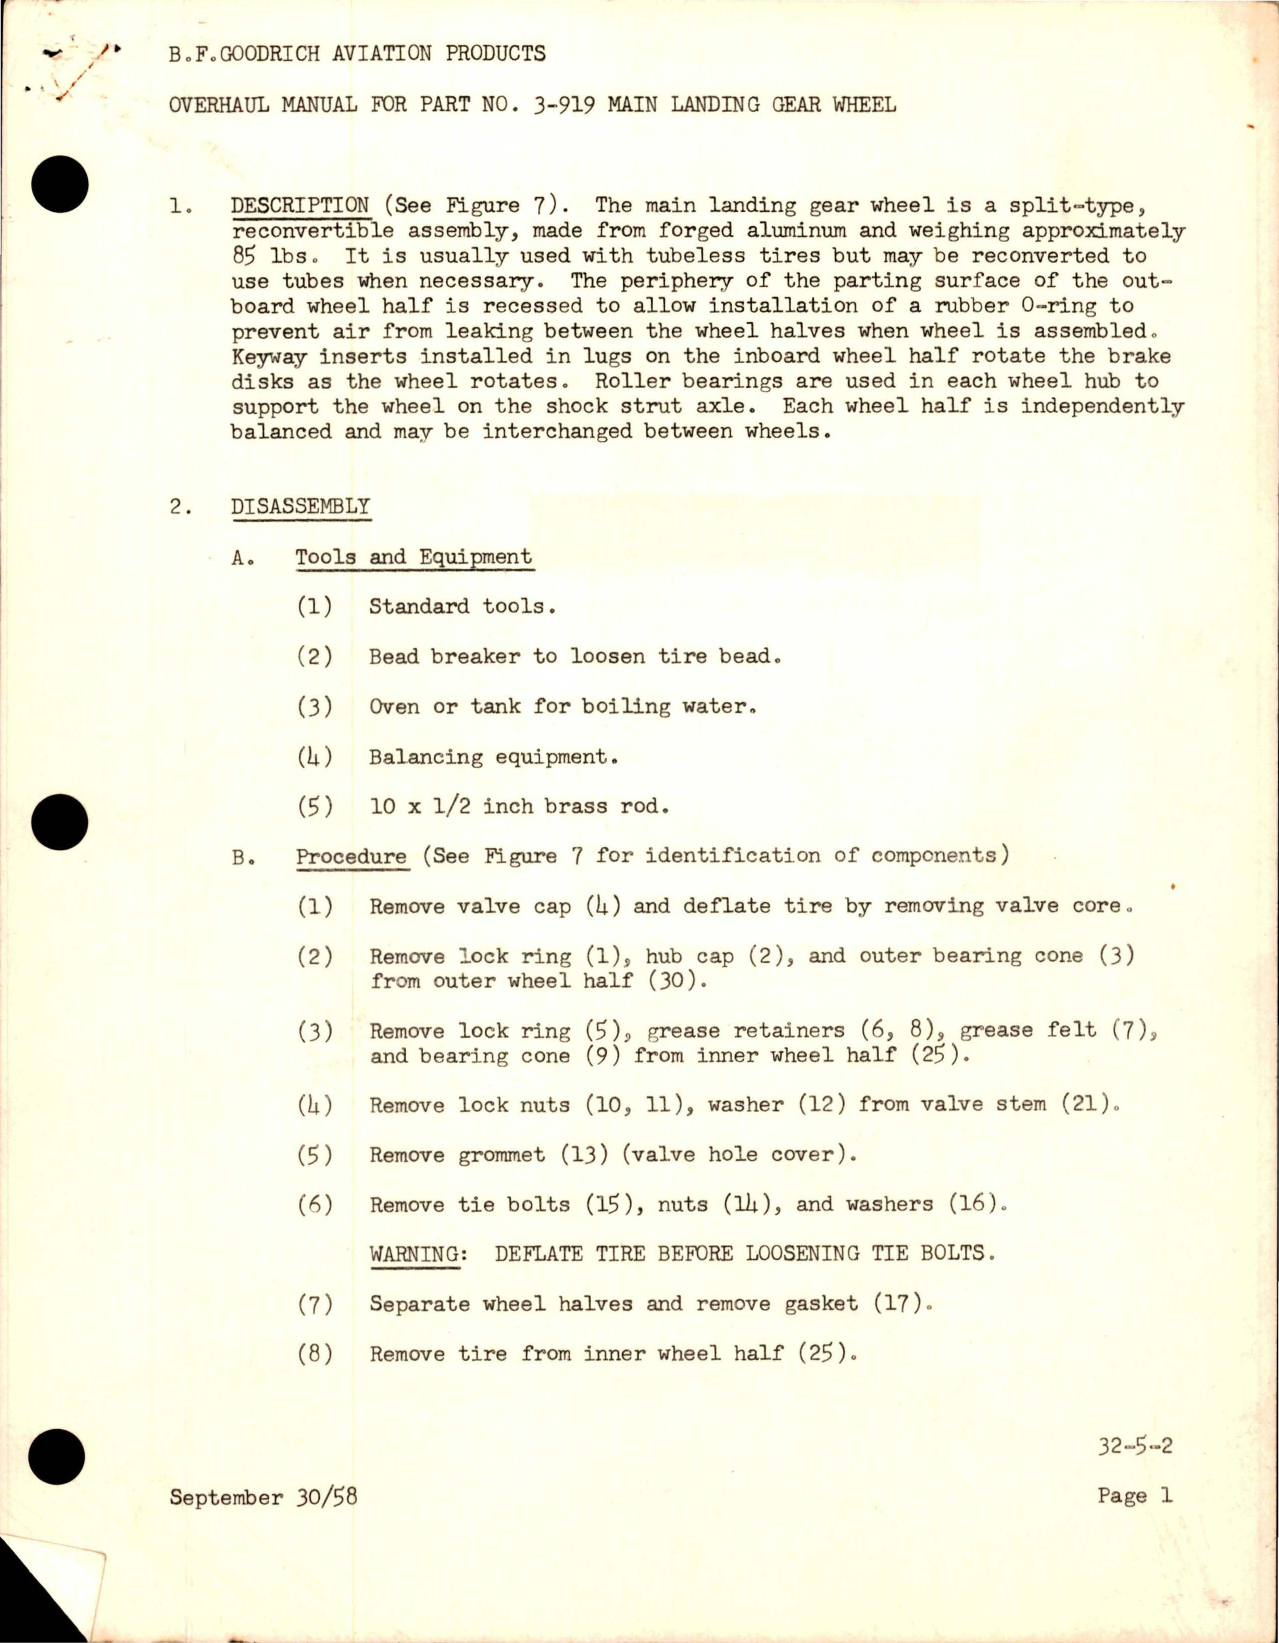 Sample page 1 from AirCorps Library document: Overhaul Manual for Main Landing Gear Wheel - Part 3-919 